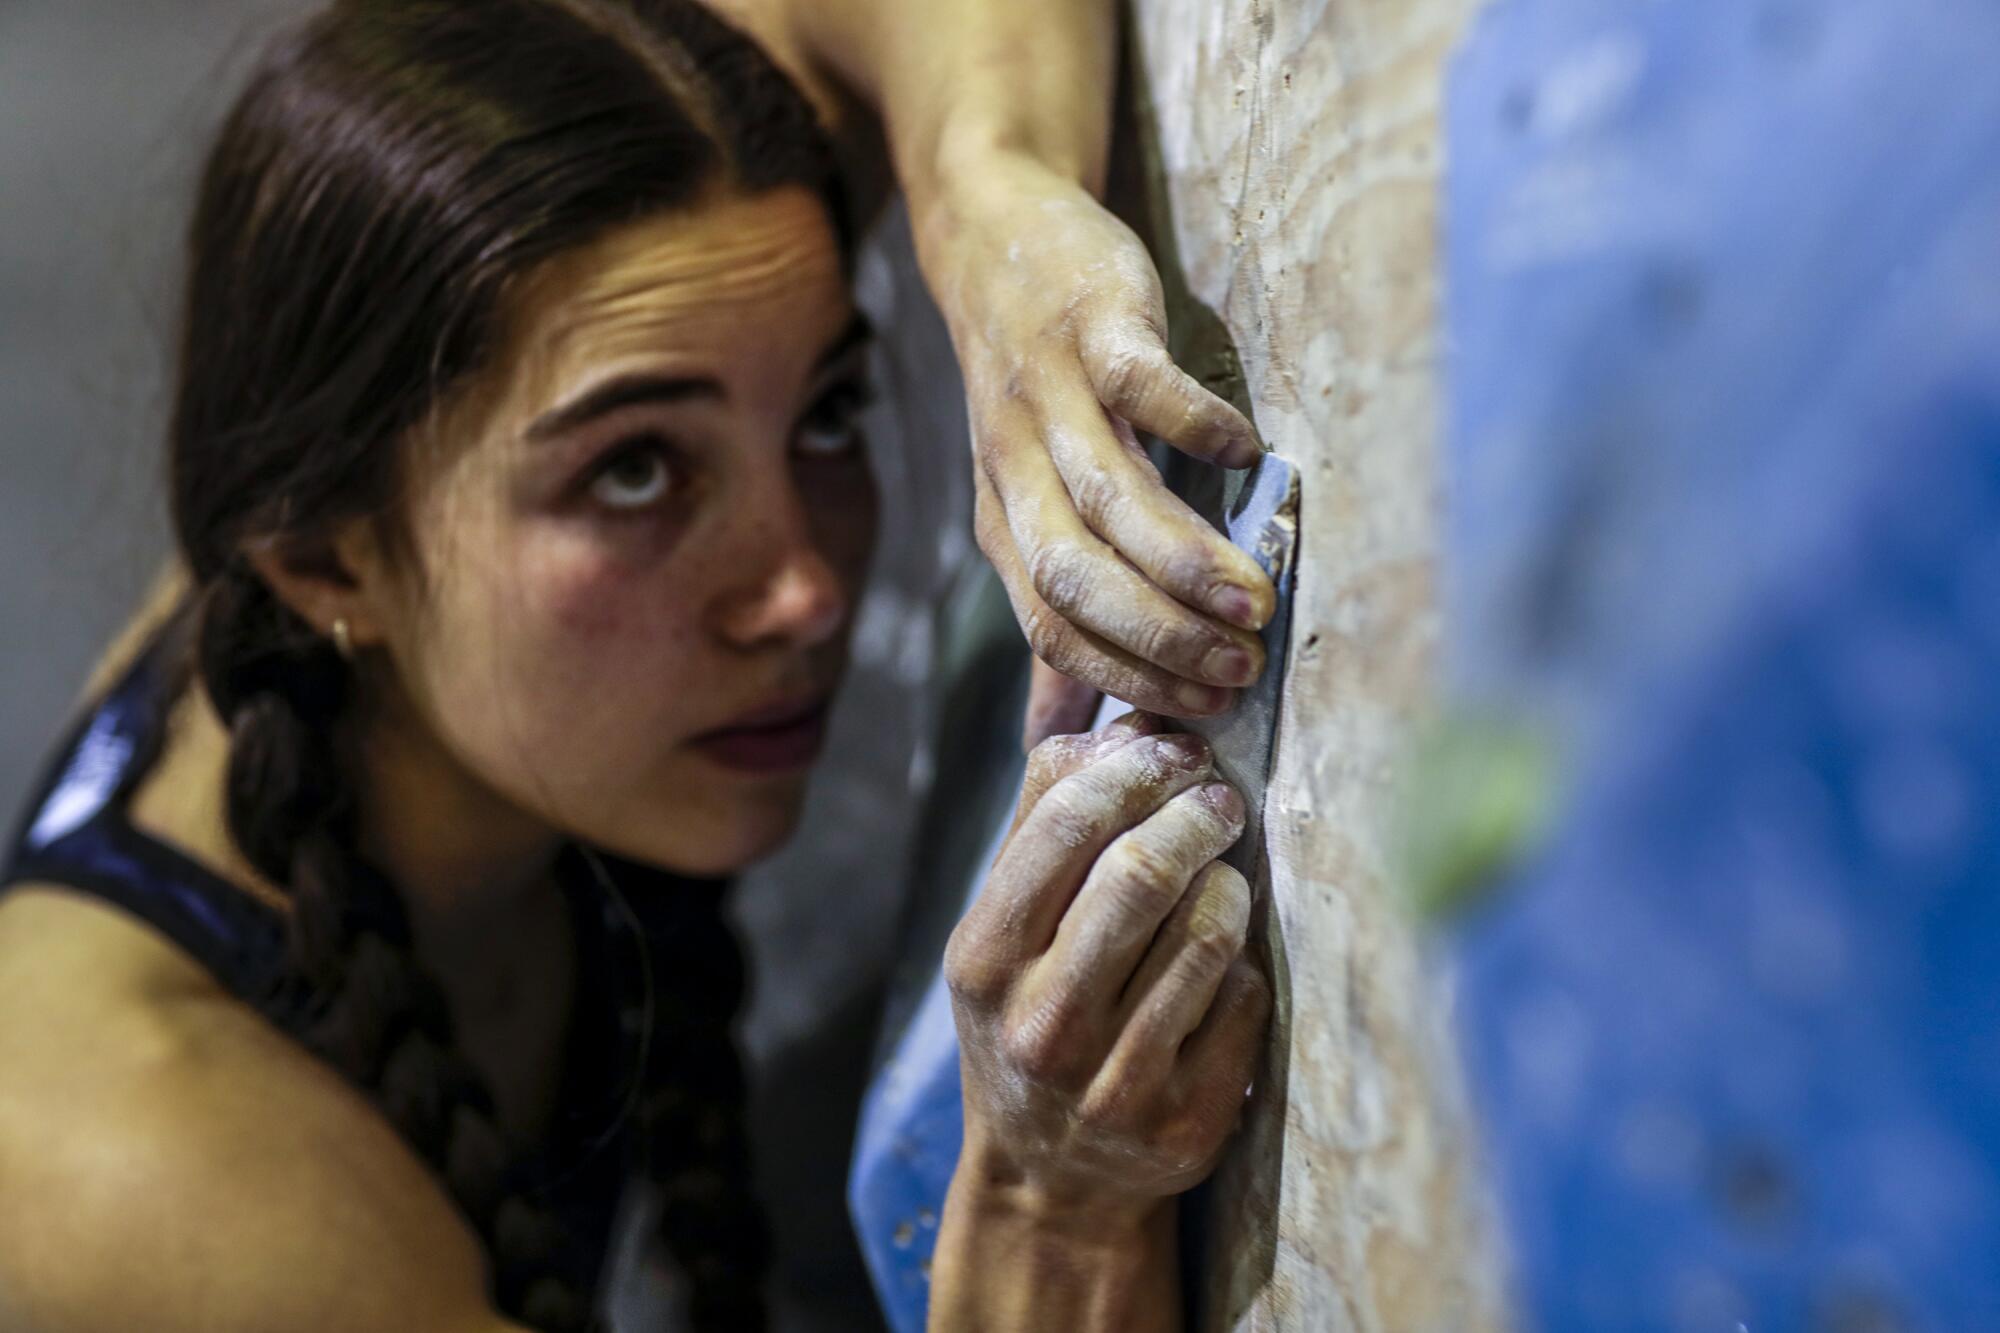 U.S. sport climber Brooke Raboutou scales a wall, also known as a "problem" to competitive climbers.